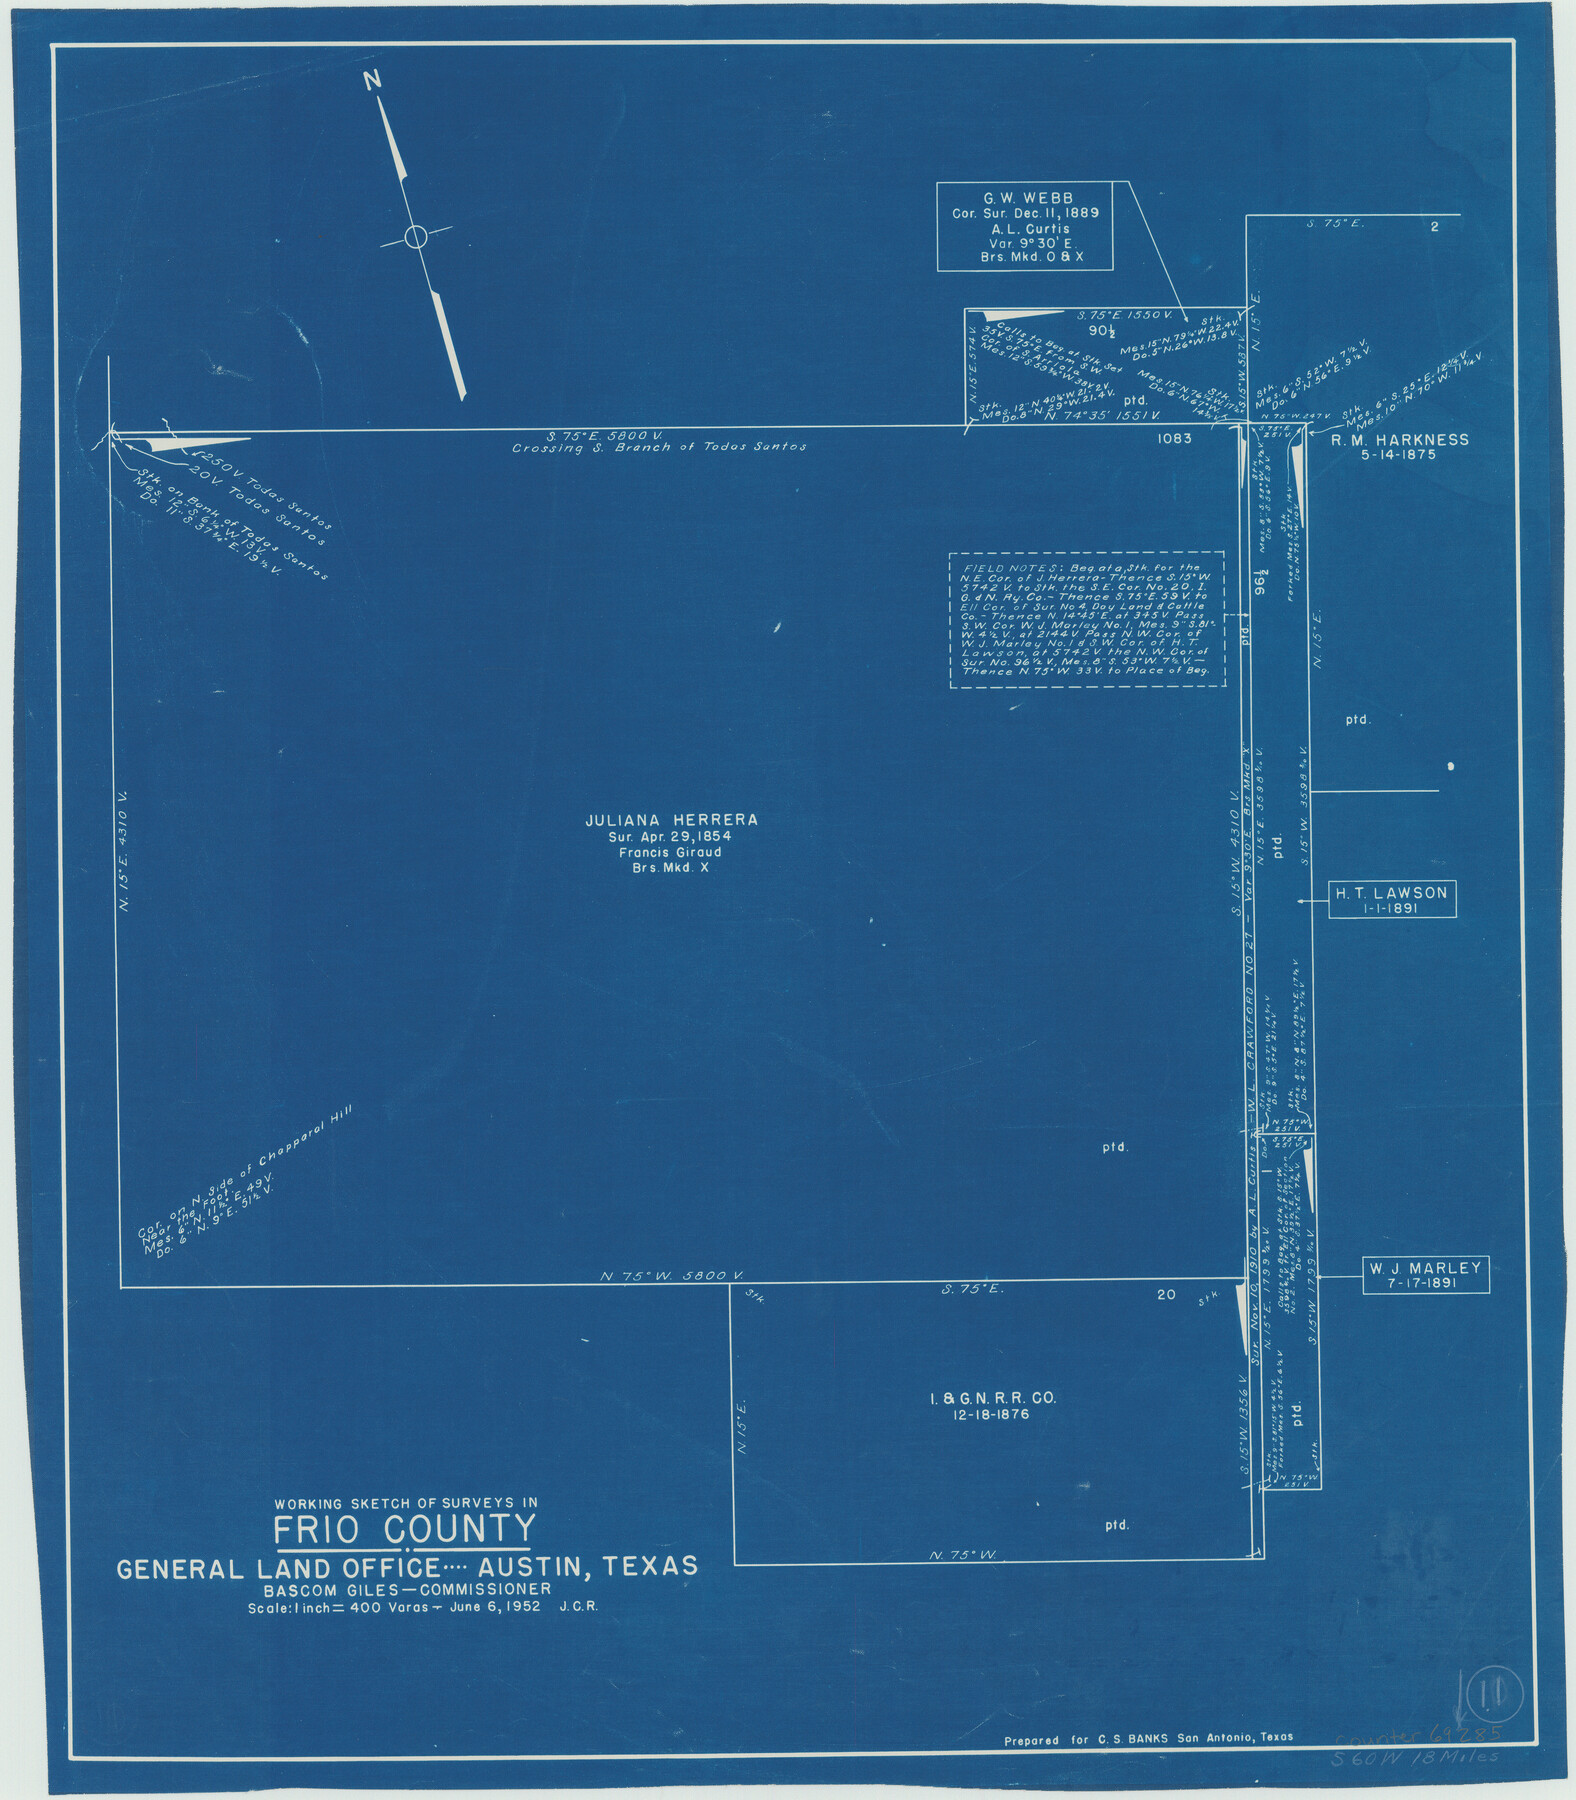 69285, Frio County Working Sketch 11, General Map Collection